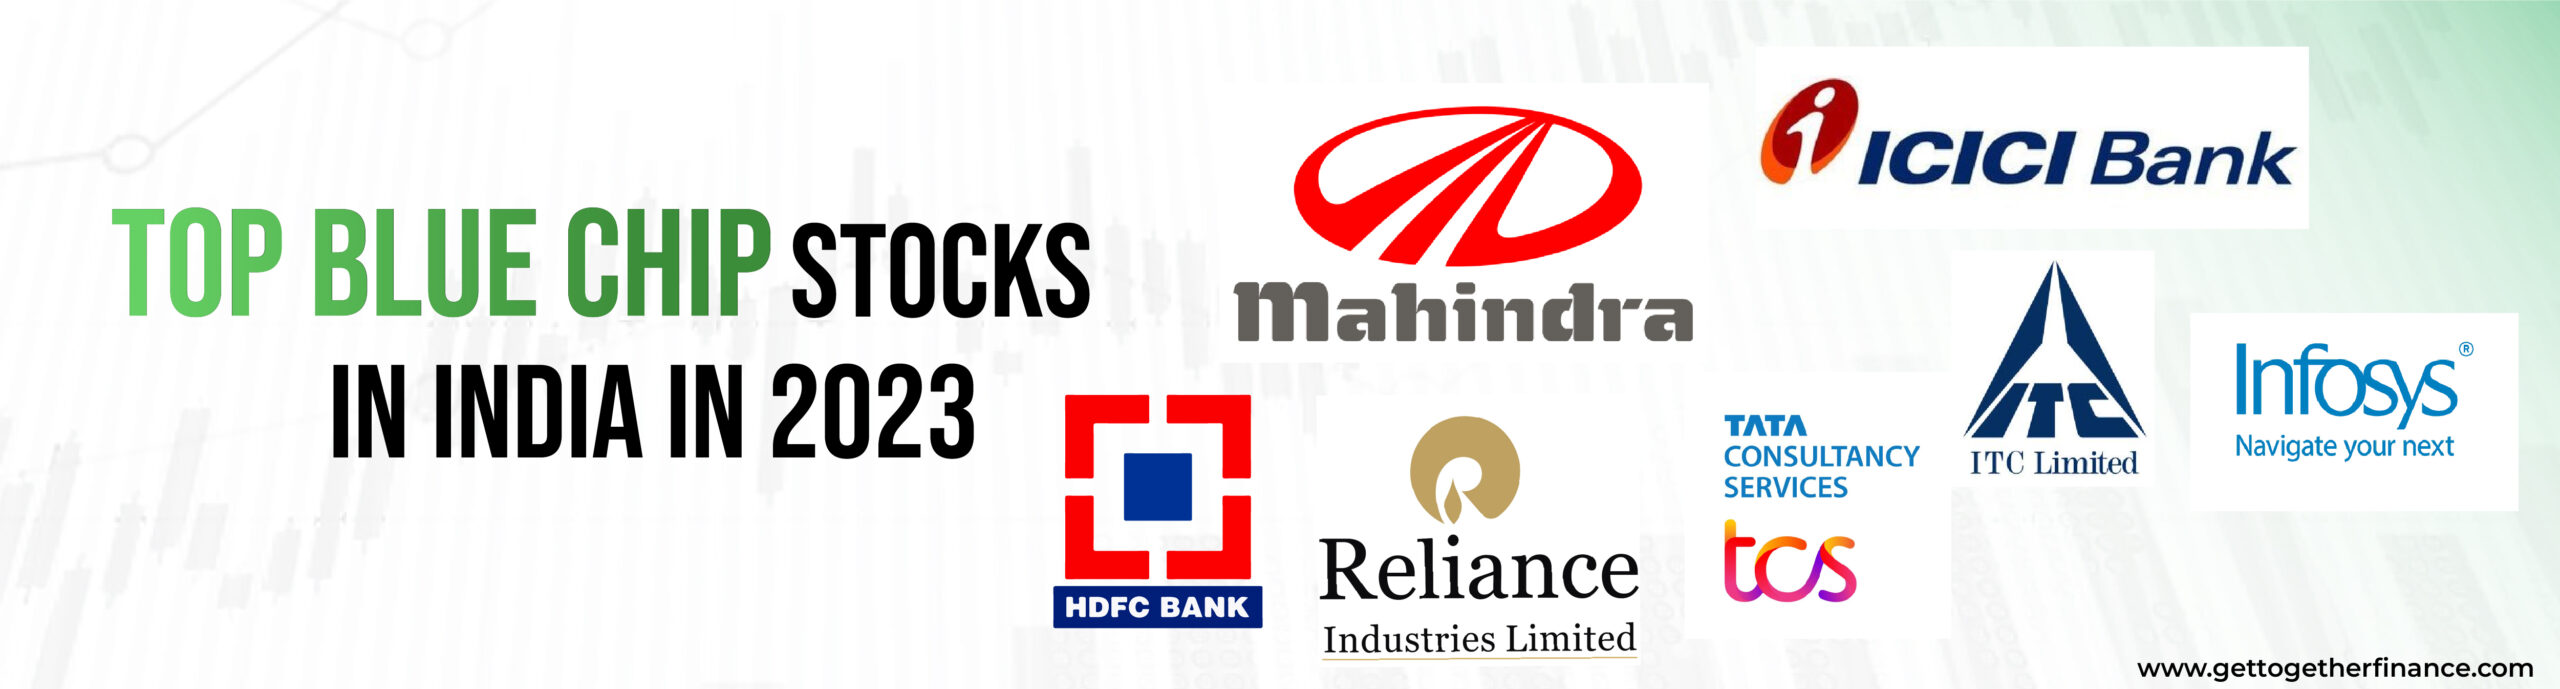 top blue chip stocks in India